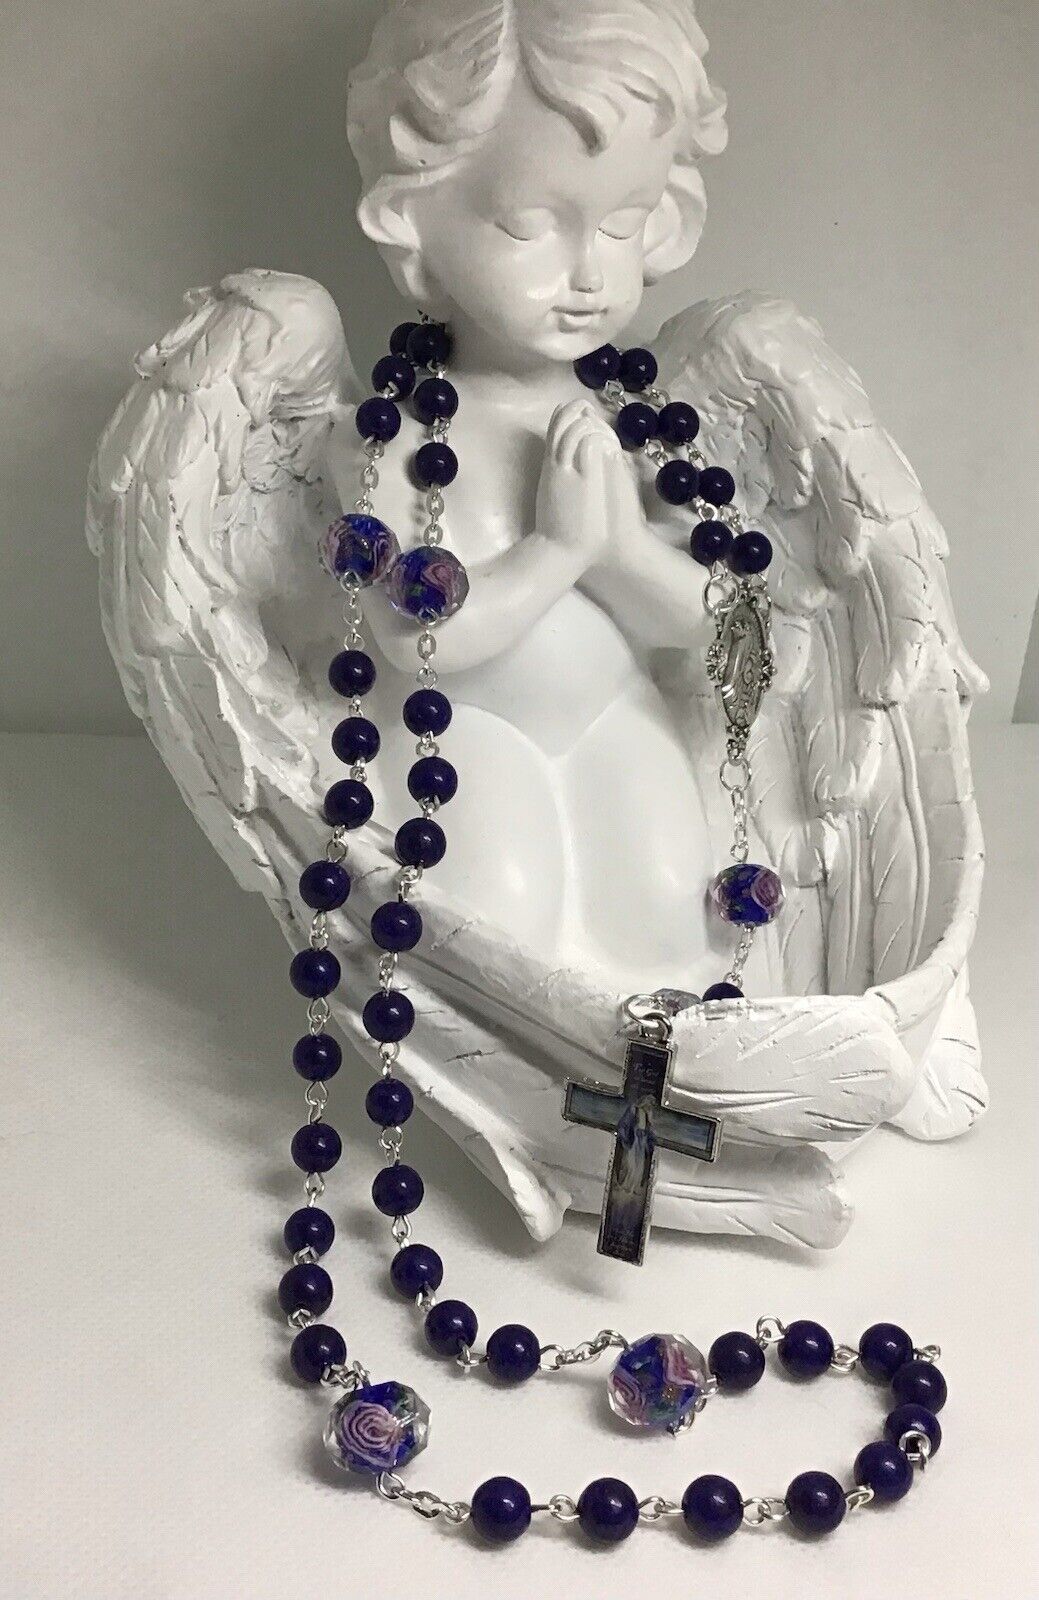 Exquisite Lapis Lazuli, Lampwork Glass And Colorized Cross Highlight This Rosary